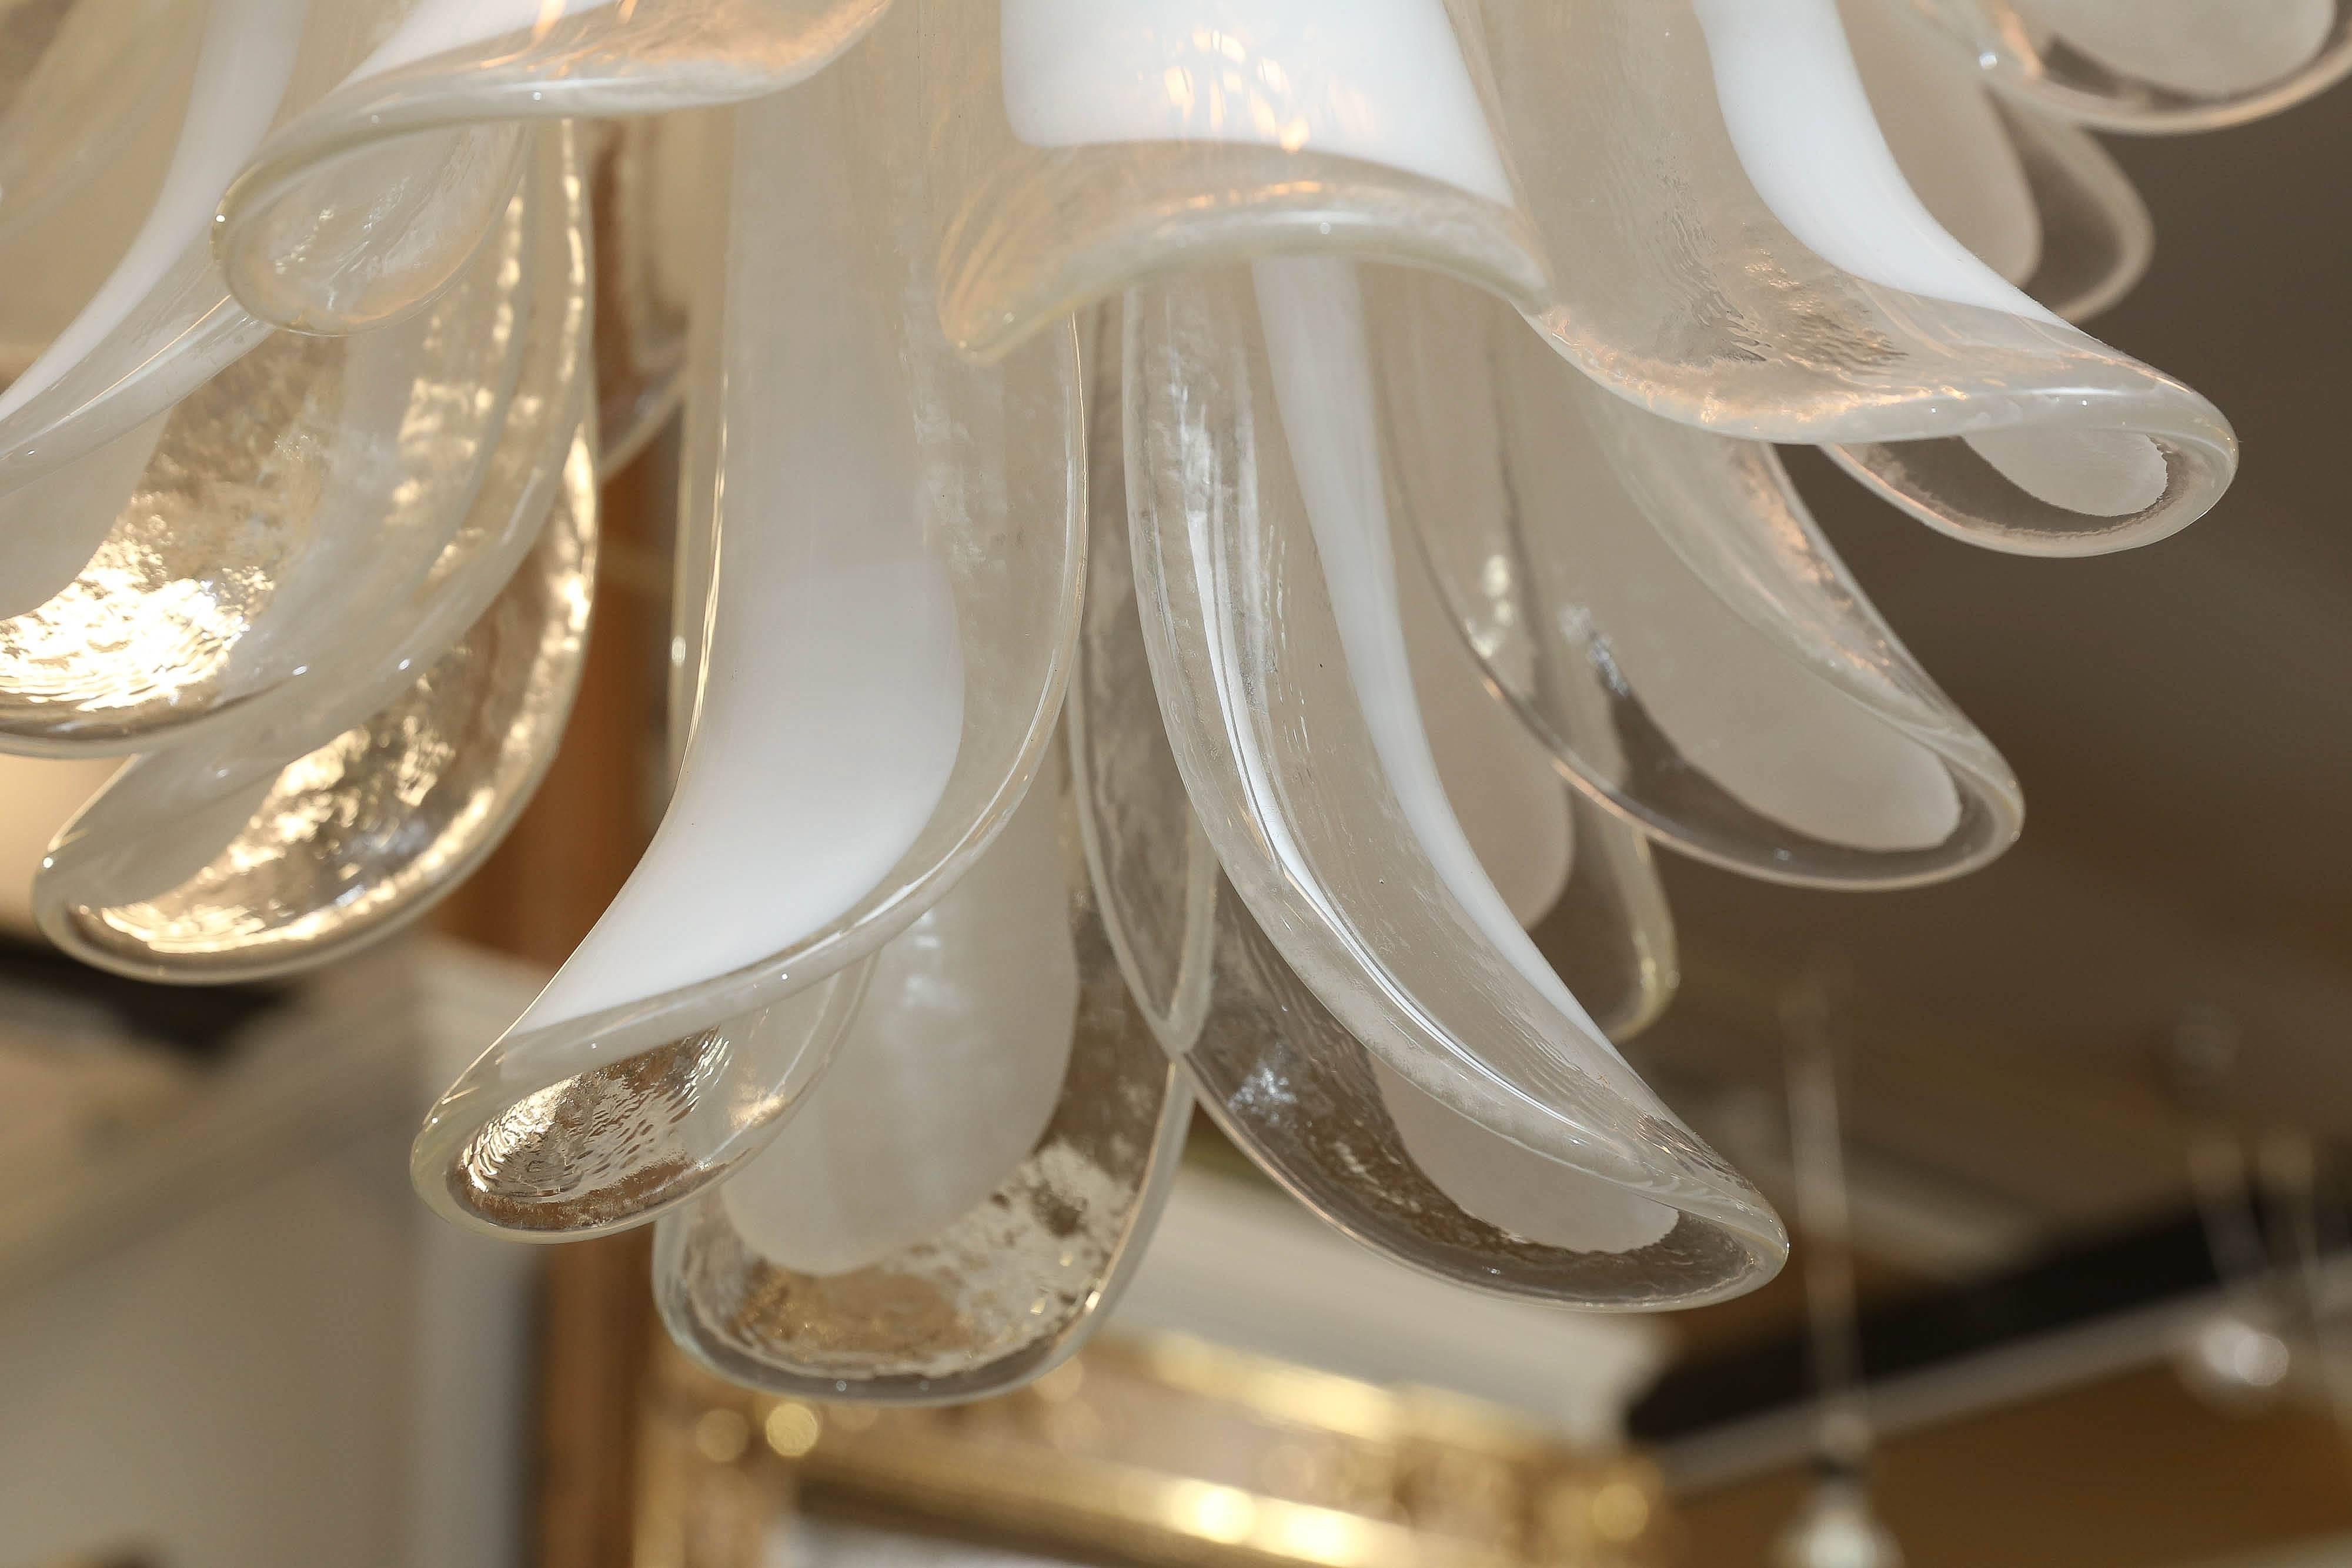 For hundreds of years Murano chandeliers have been signs of style and taste, symbolizing both luxury as well as opulence for at least 300 years. Designers and interior decorators alike realize there is no other symbol of power and opulence as a